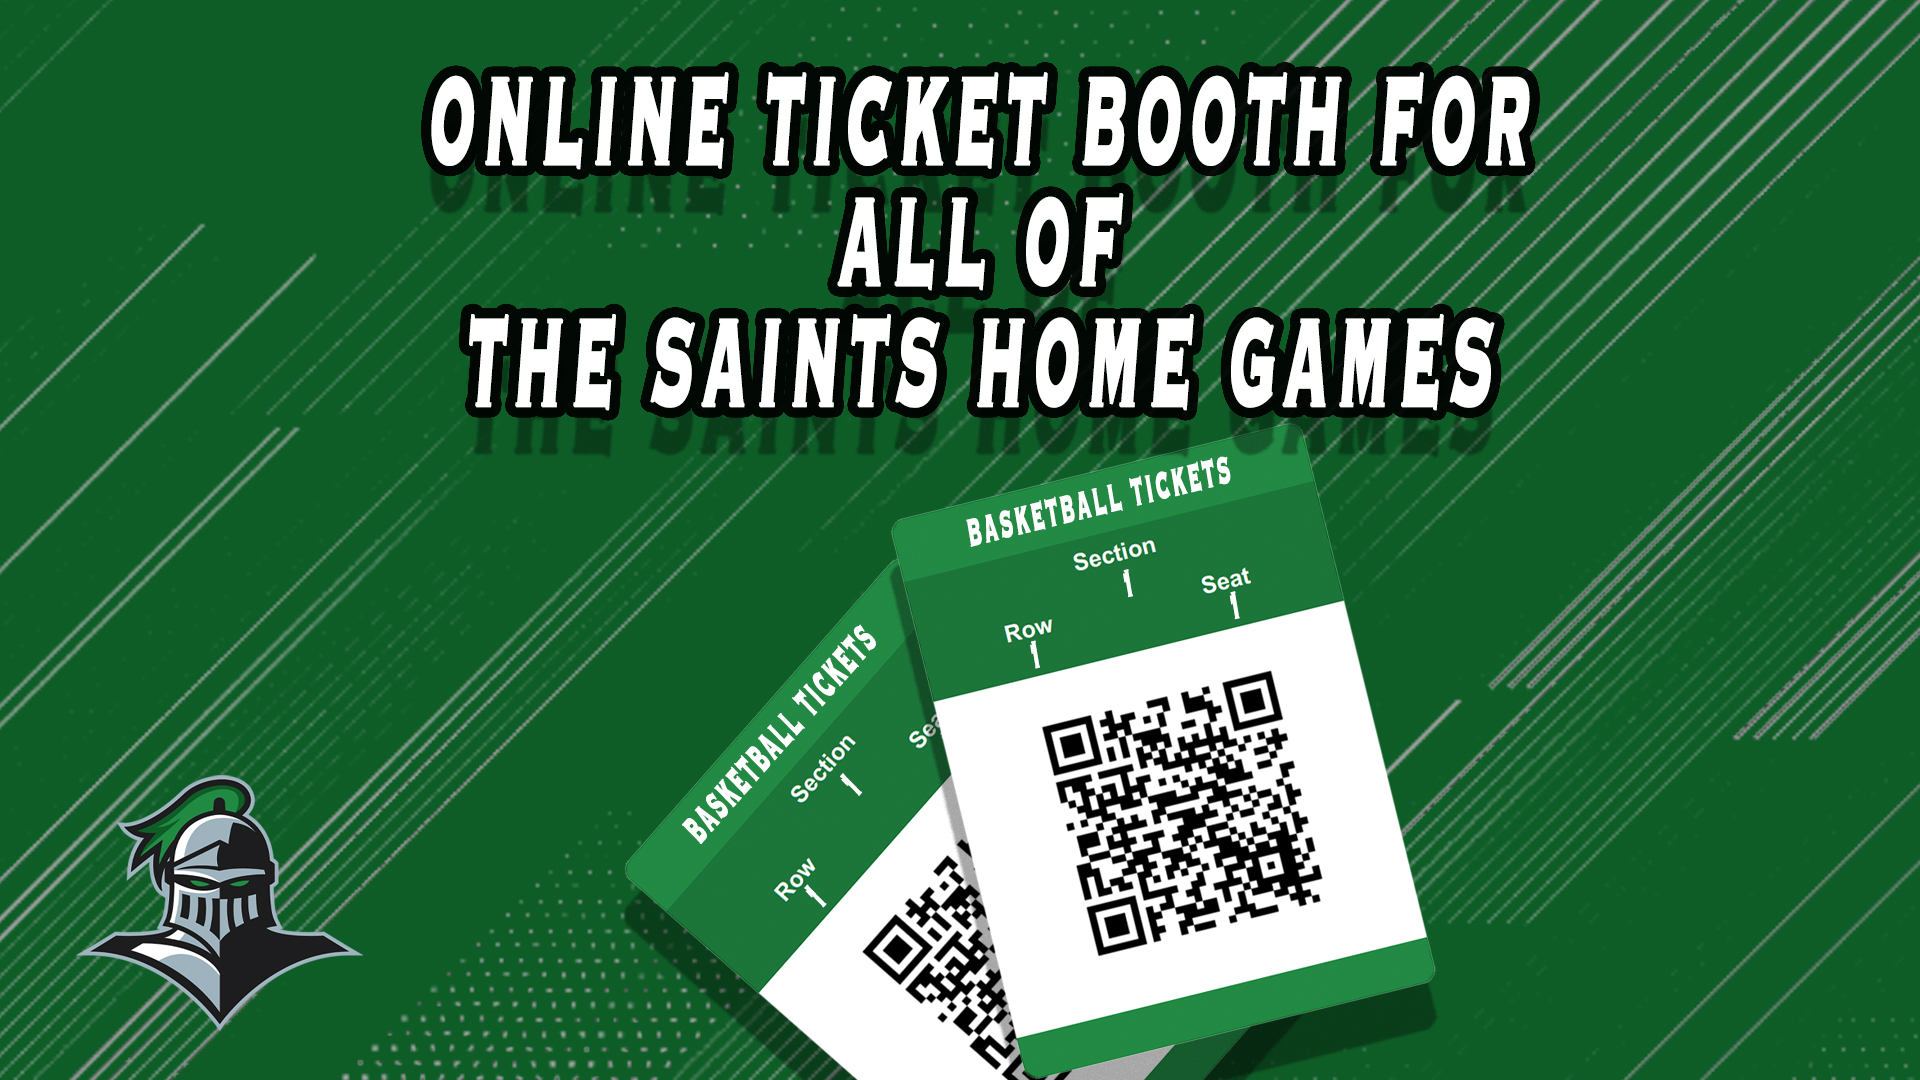 How to get tickets to Saints Games